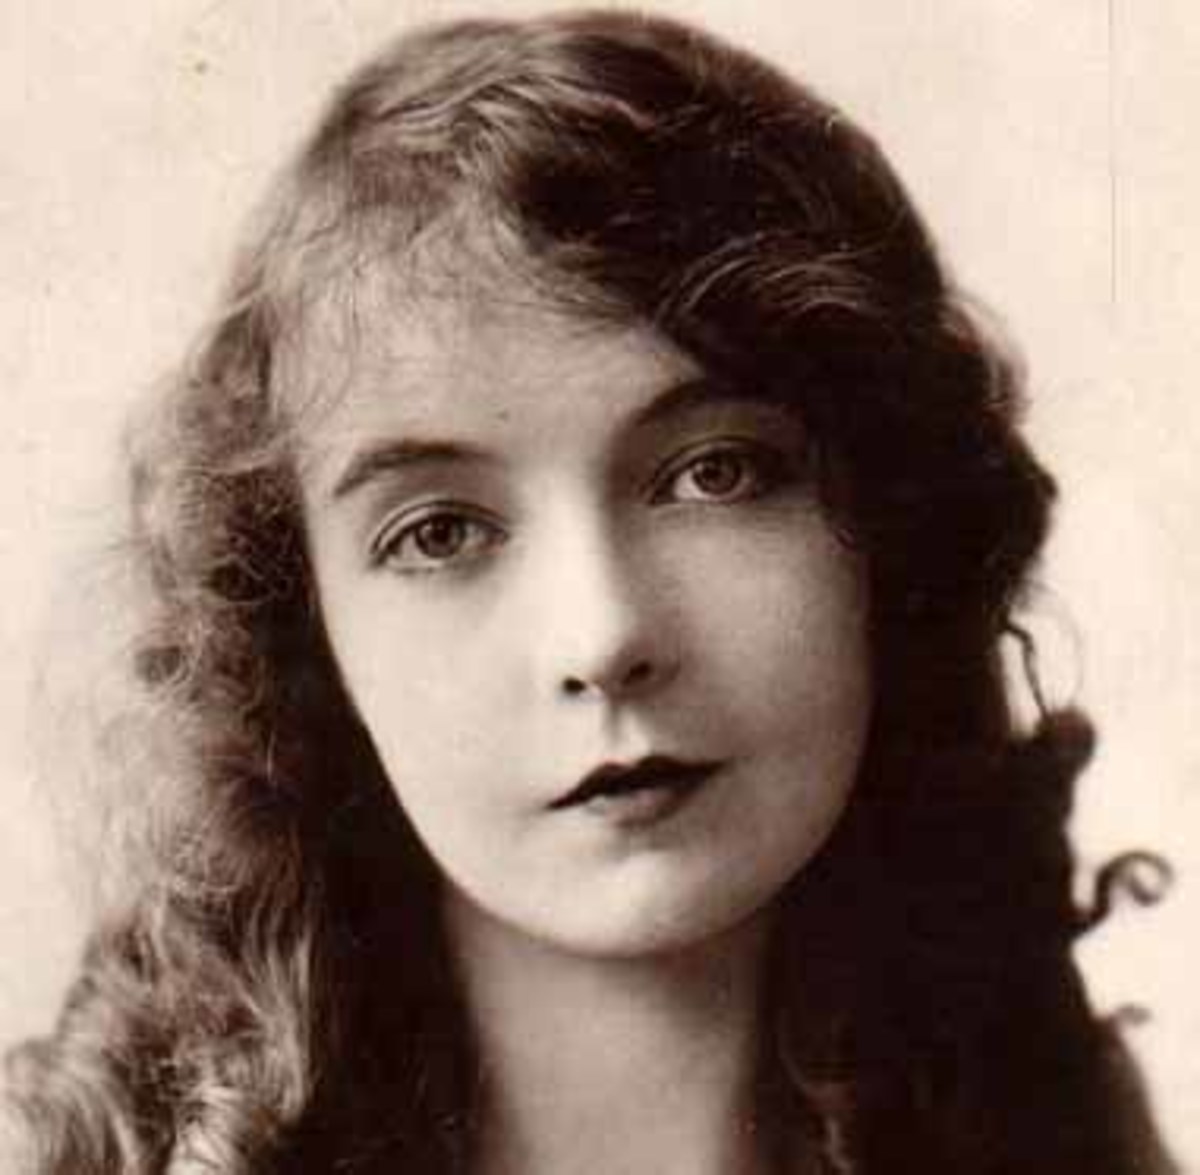 Lillian Gish was one of the first influential directors during the silent film era.